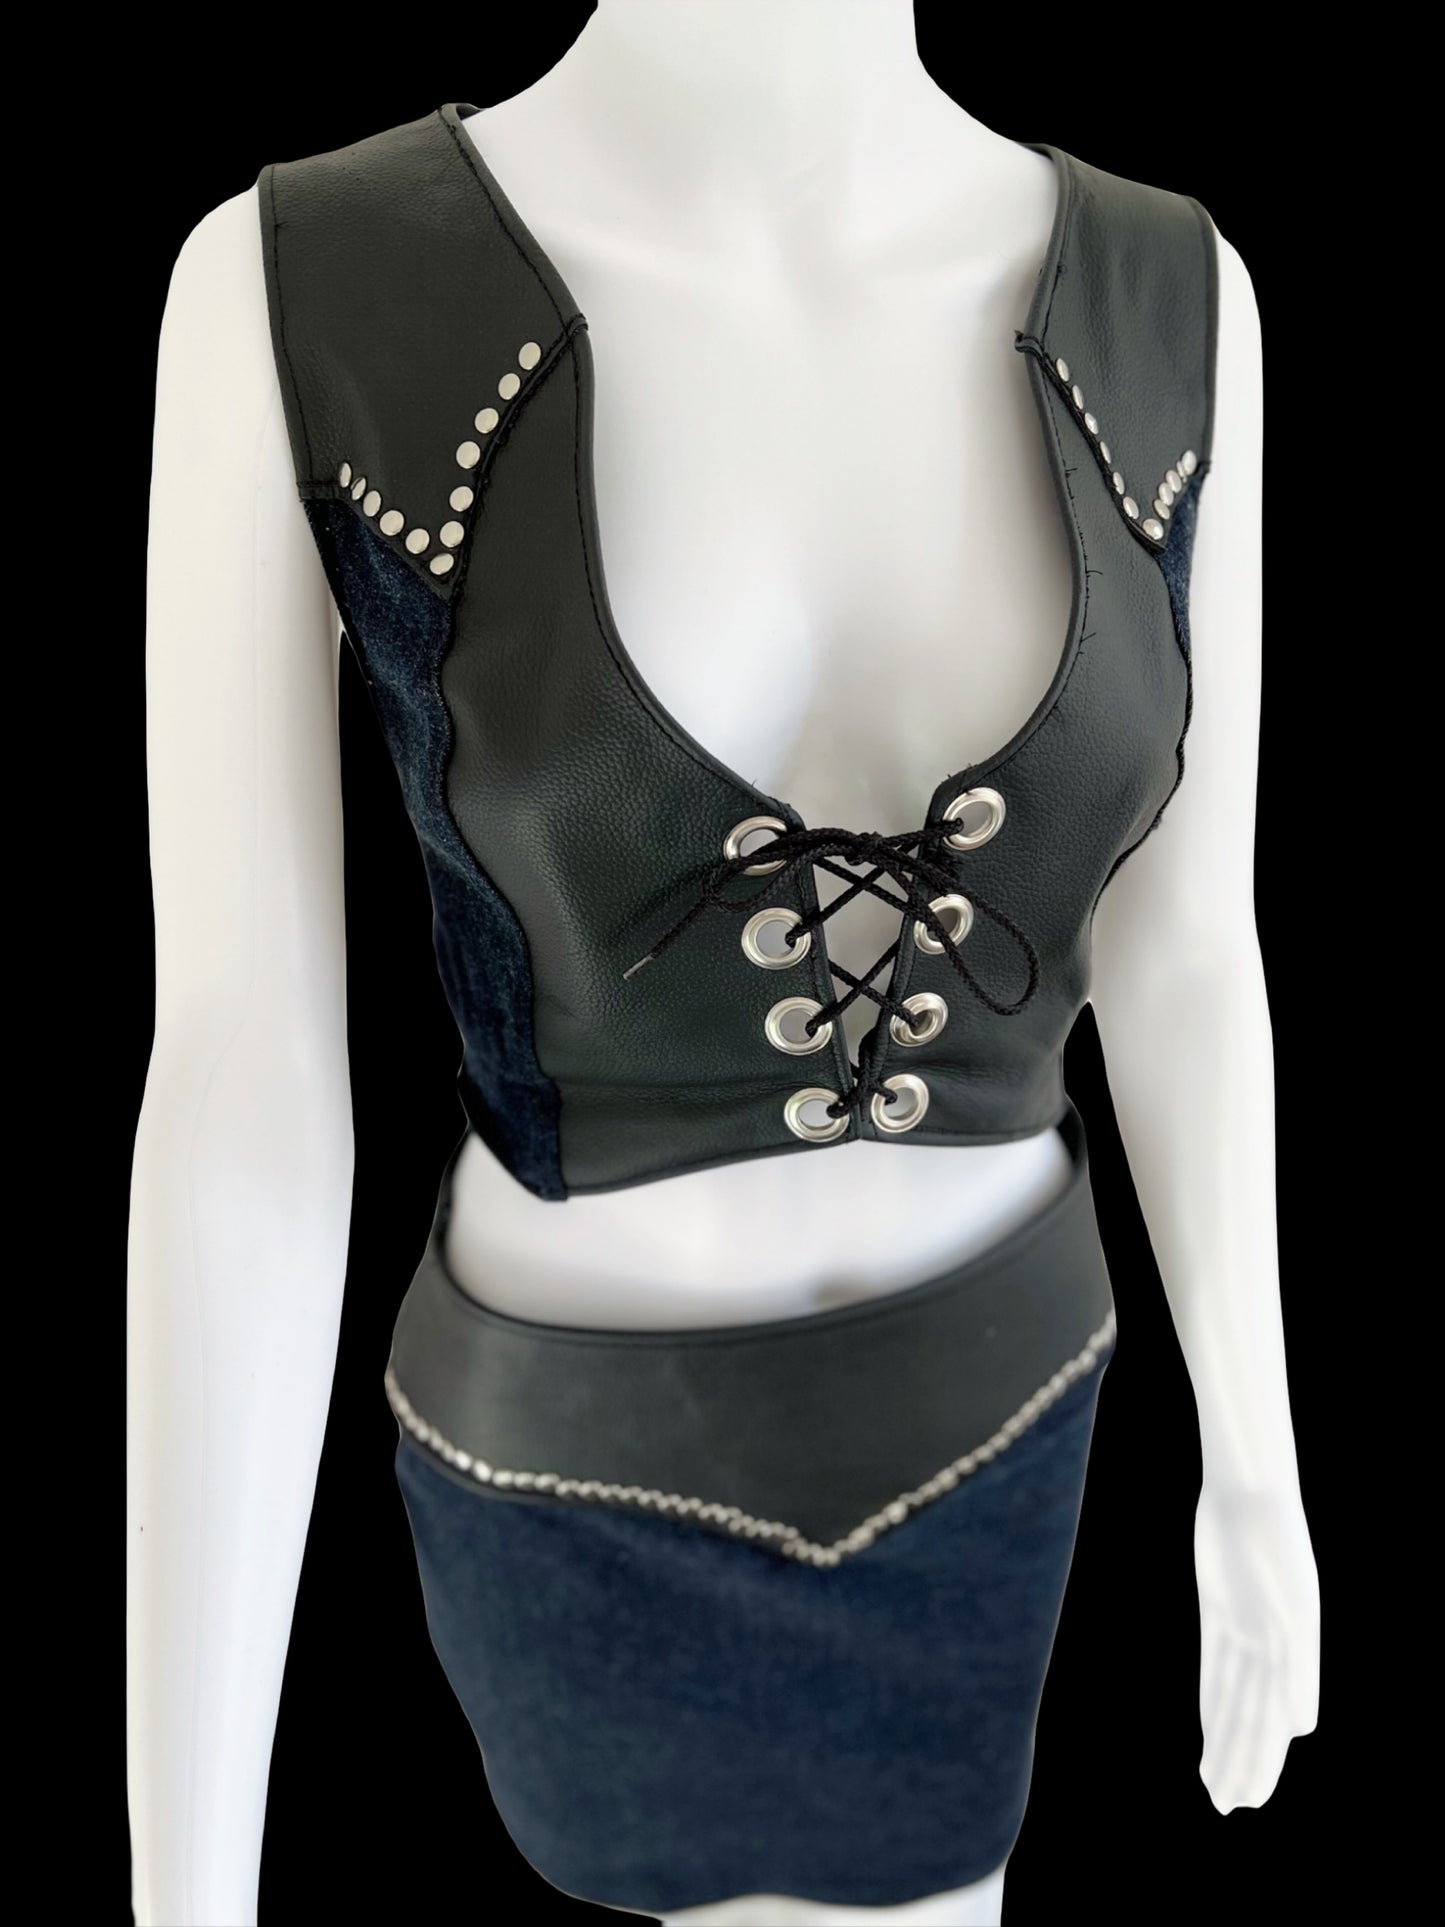 The Blue Jean Outlaw Queen Vest